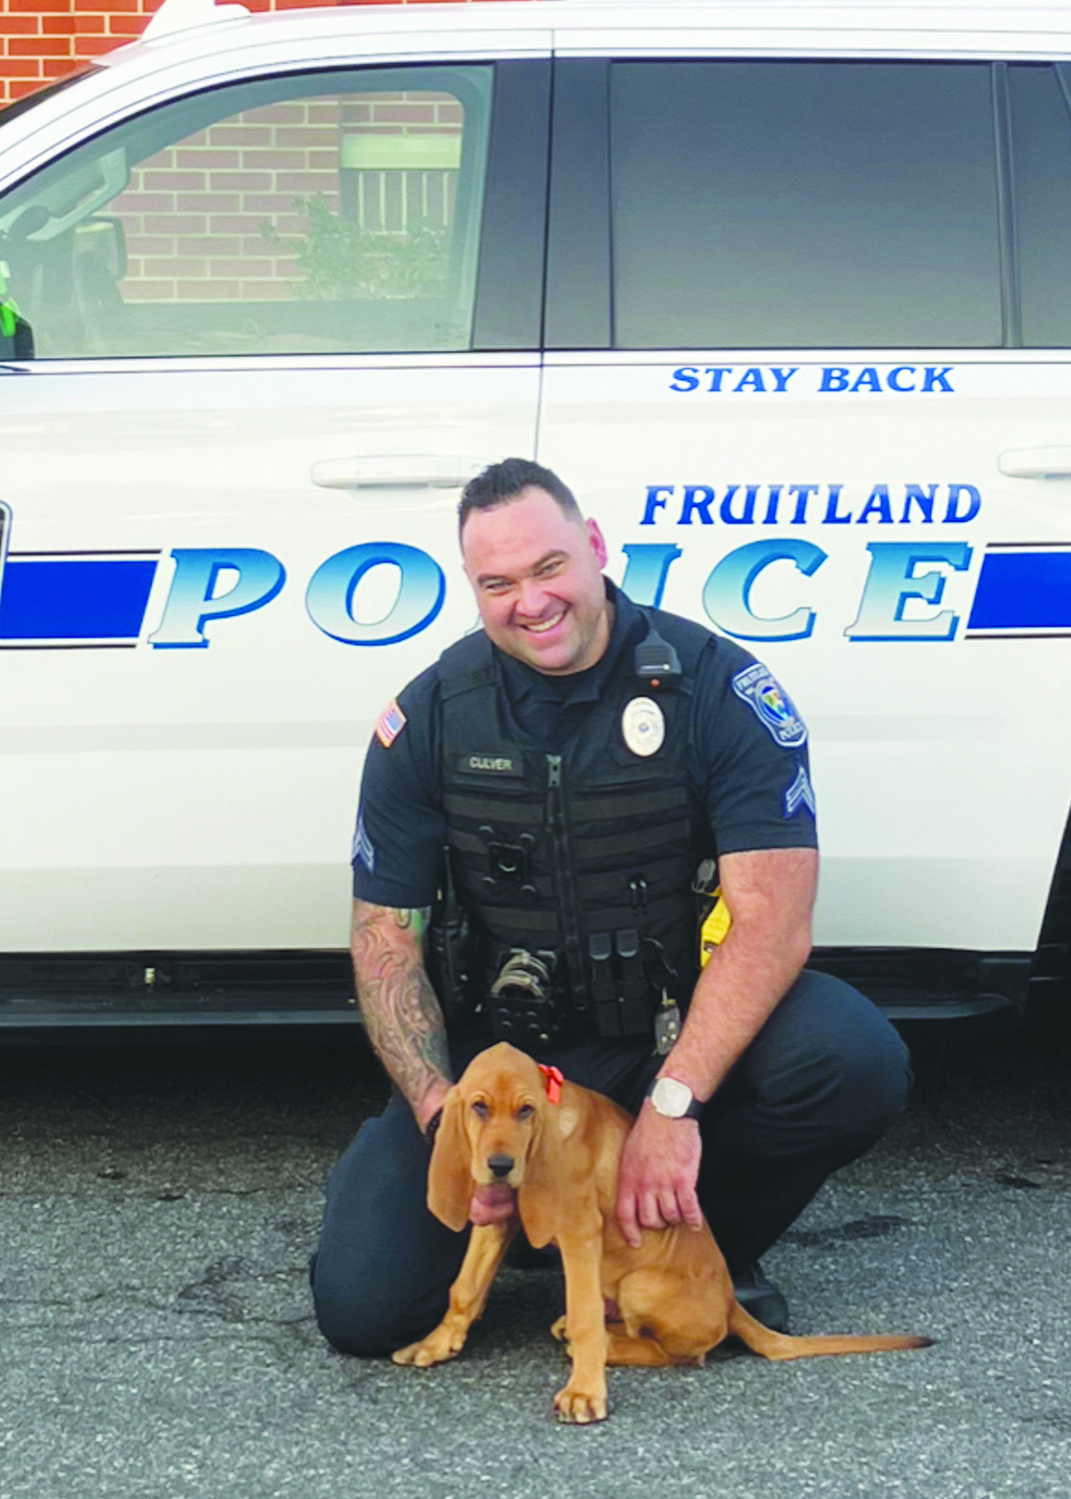 Fruitland Police Department Cpl. Josh Culver will be Boone the bloodhound’s handler. When needed, Boone’s services will be made available to police departments in the entire Lower Eastern Shore.